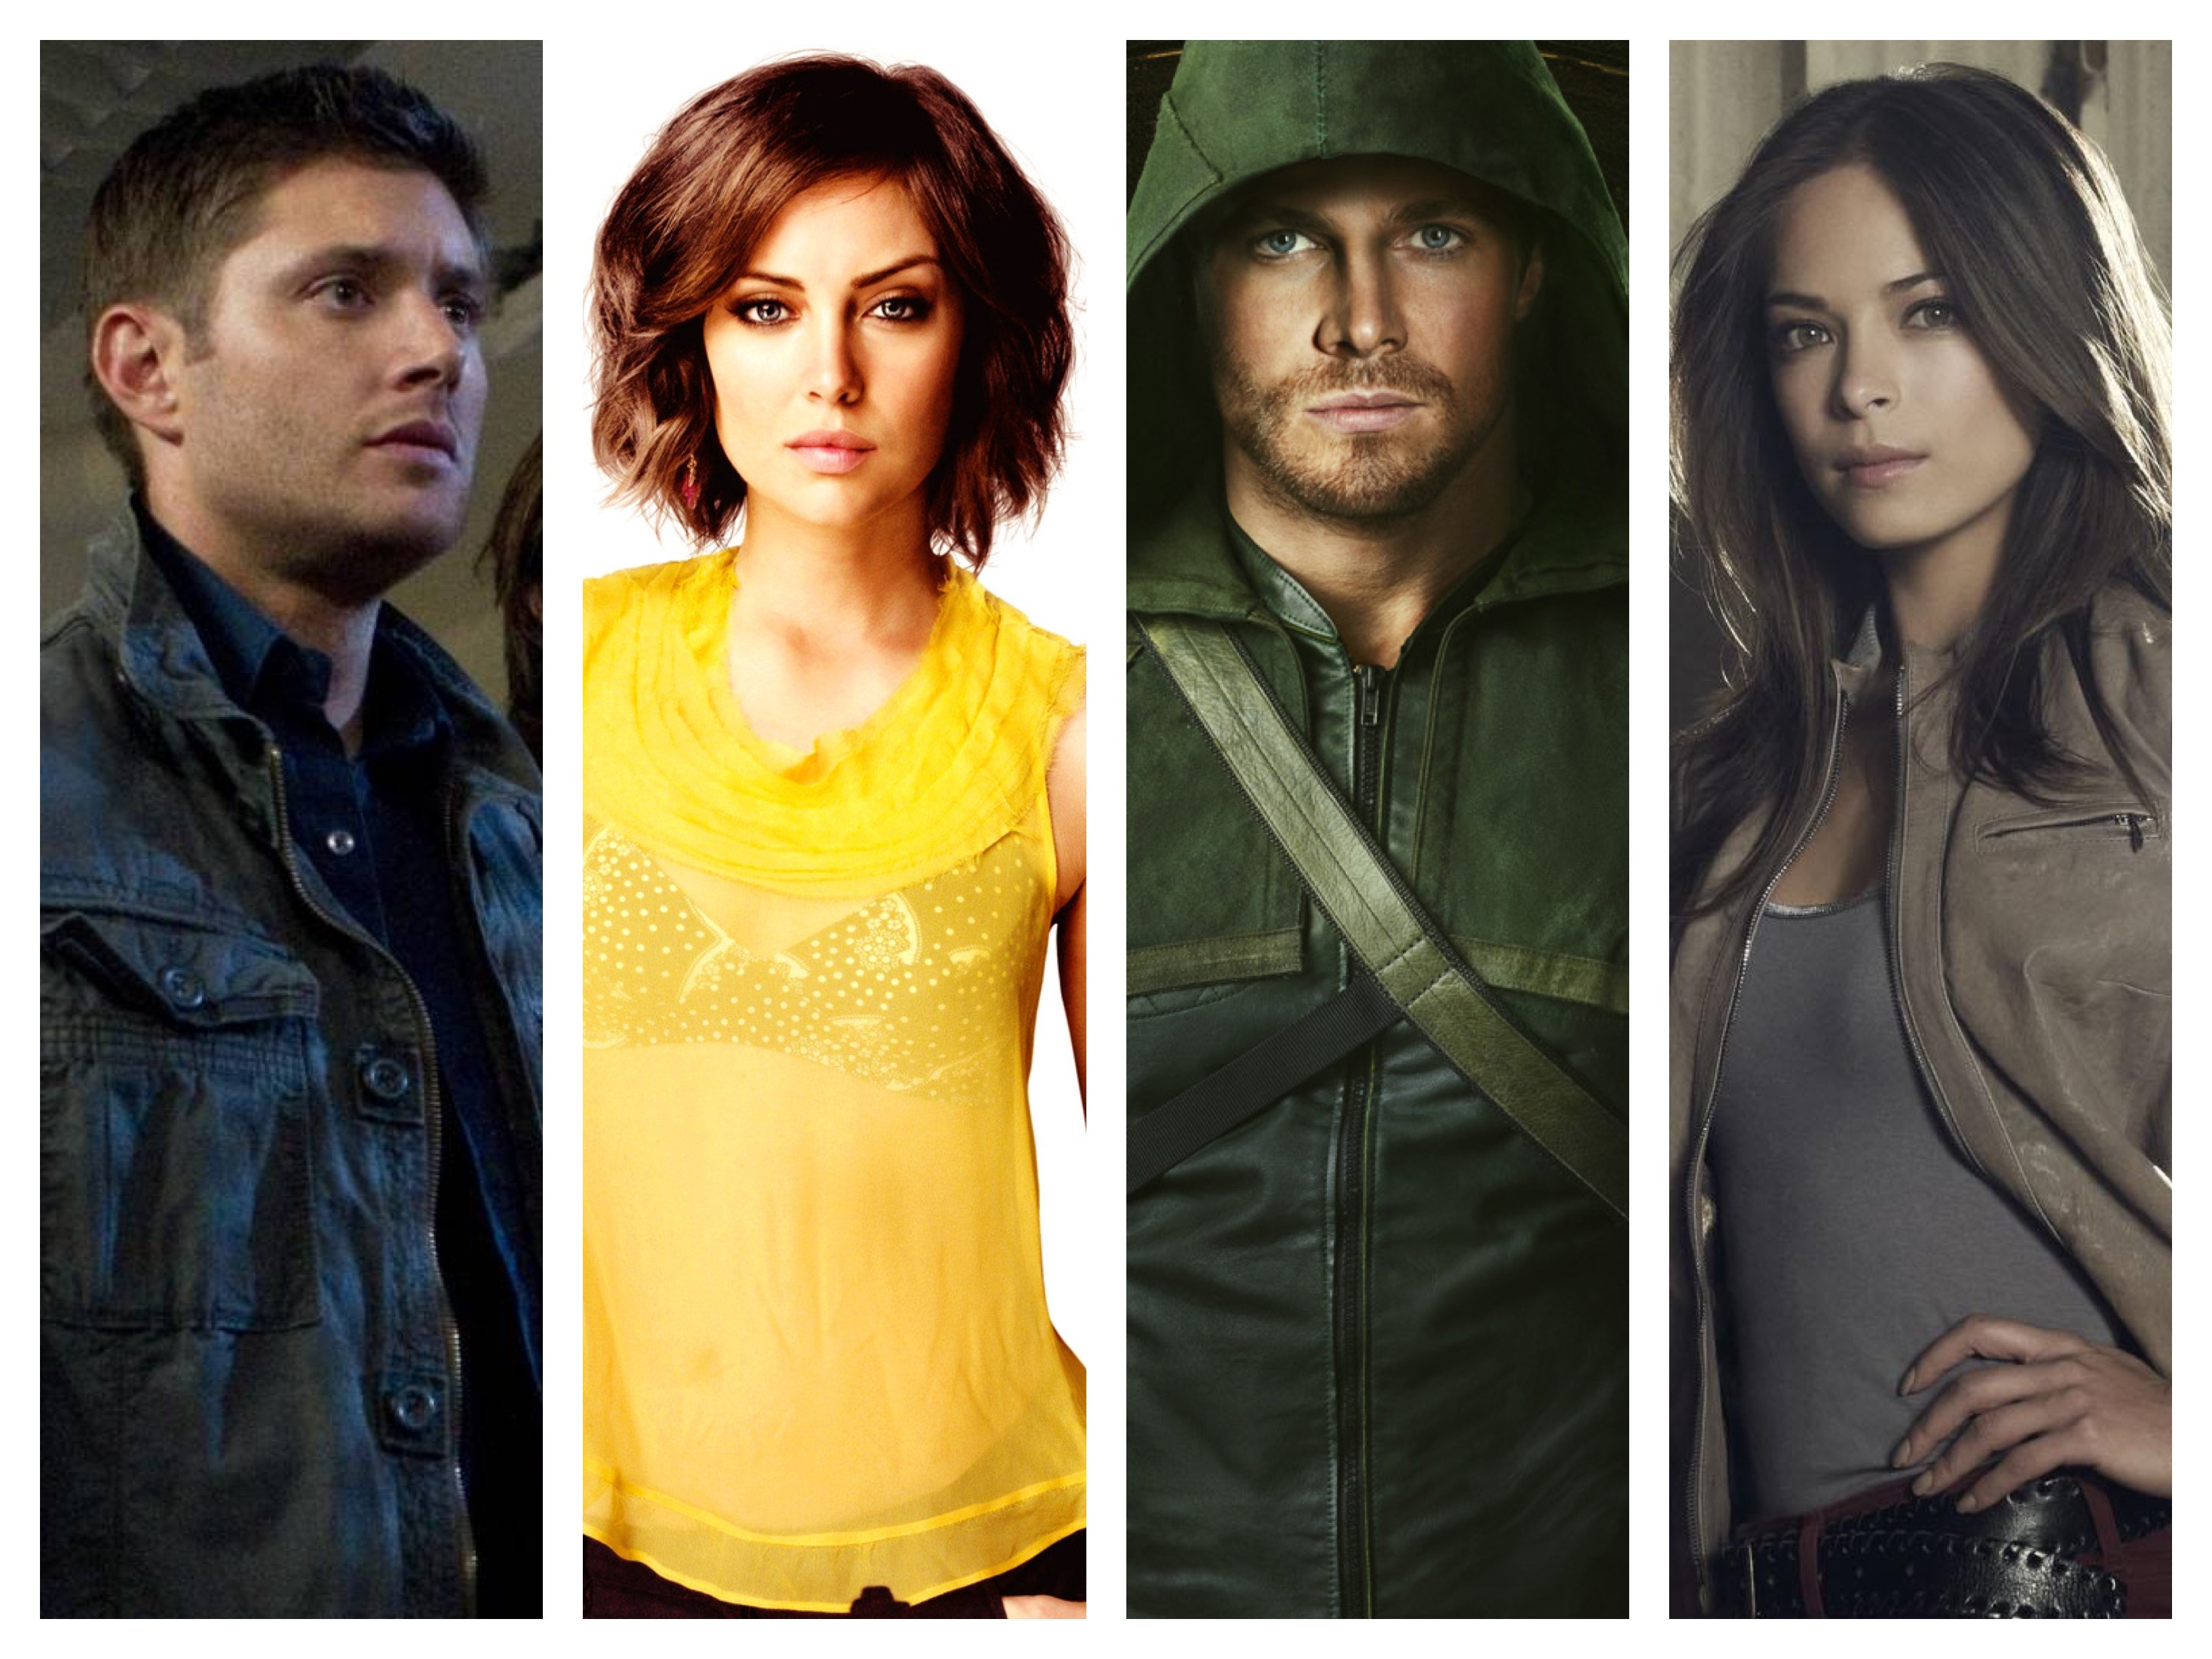 Cancelled + Renewed CW TV Shows [as of 12/6/12]